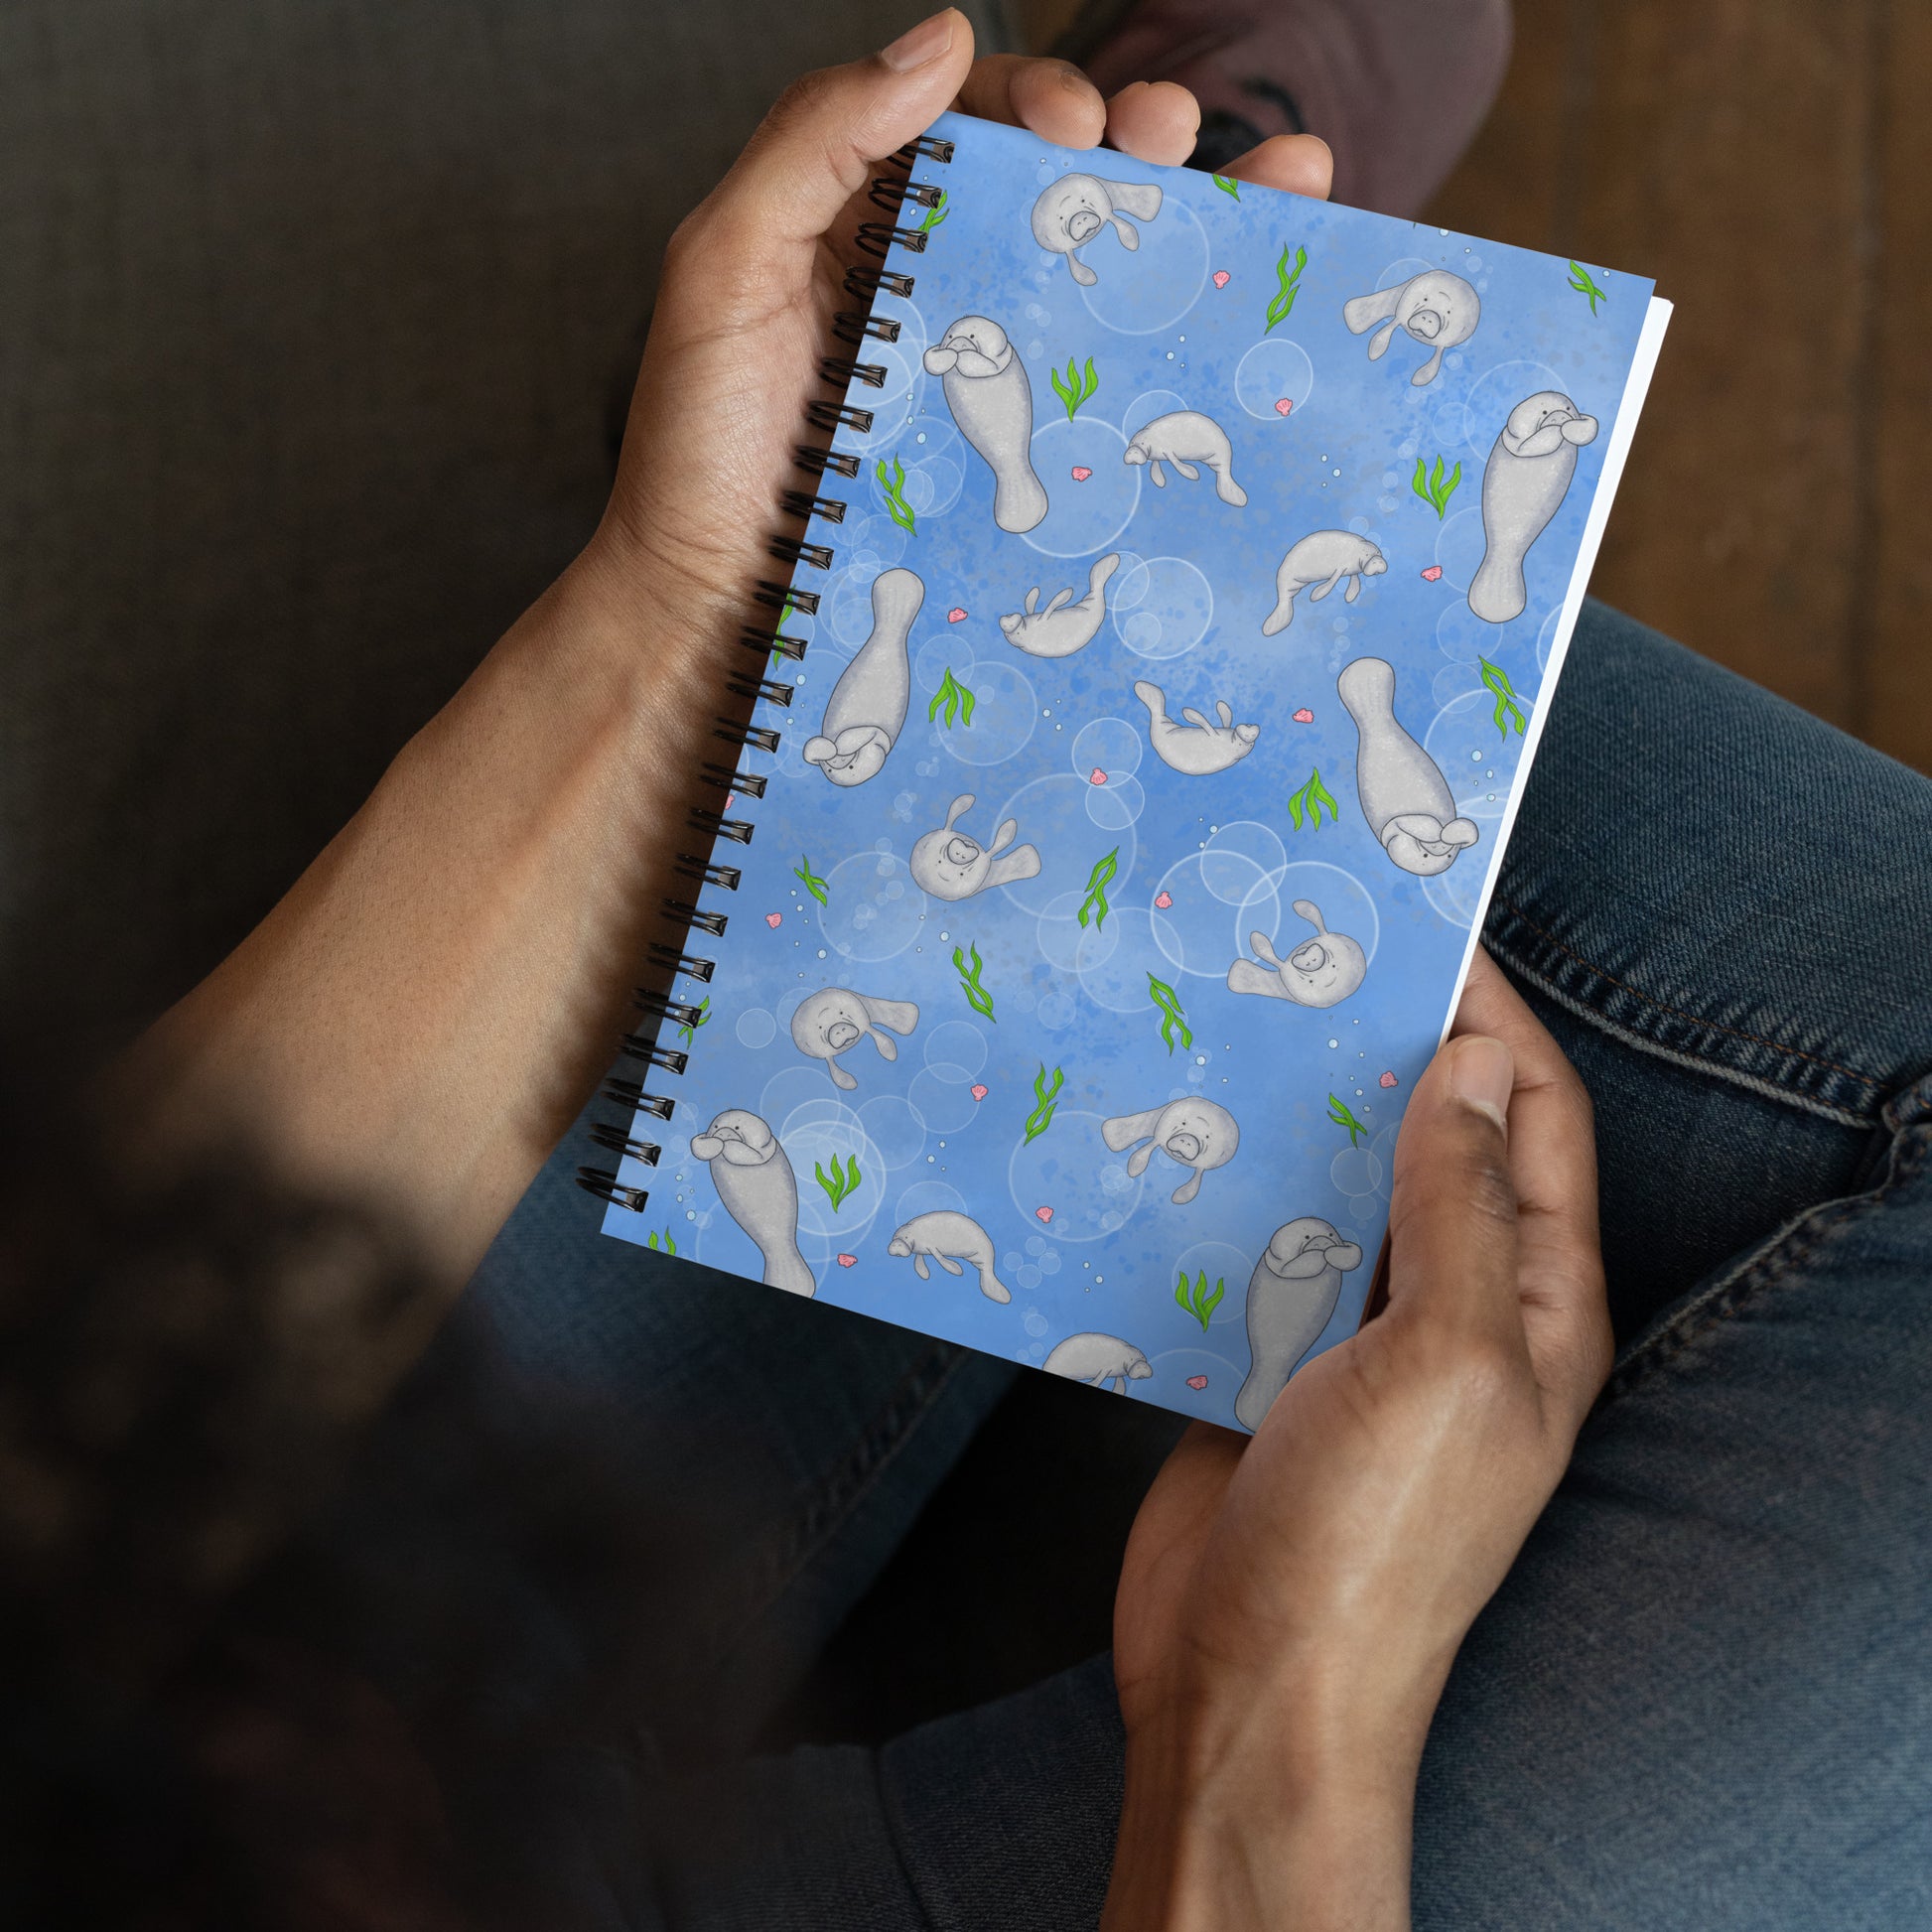 Spiral bound notebook with soft touch cover and 140 dotted pages. Cover features cute illustrated manatees swimming in the water. Measures 5.5 inches by 8.5 inches. Shown in model's hands.